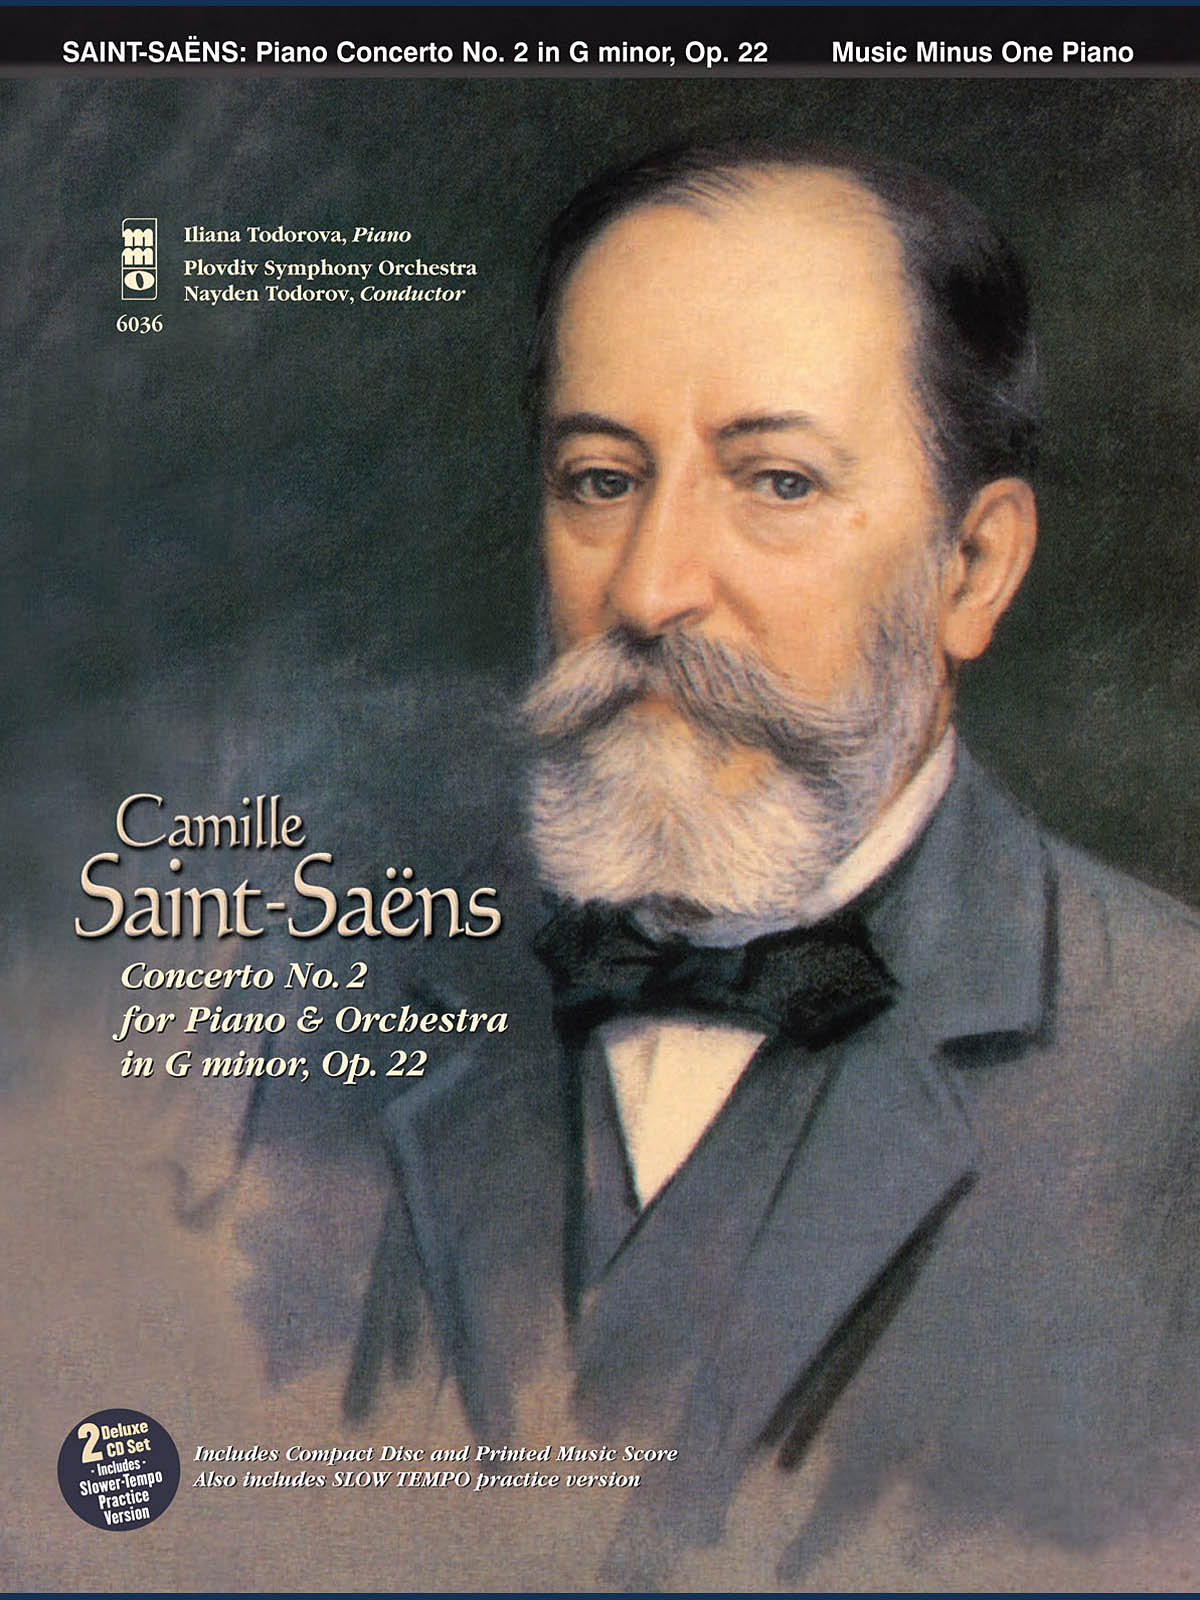 Camille Saint-Saëns: Saint-Saens - Concerto No. 2 in G Minor  Op. 22: Piano: